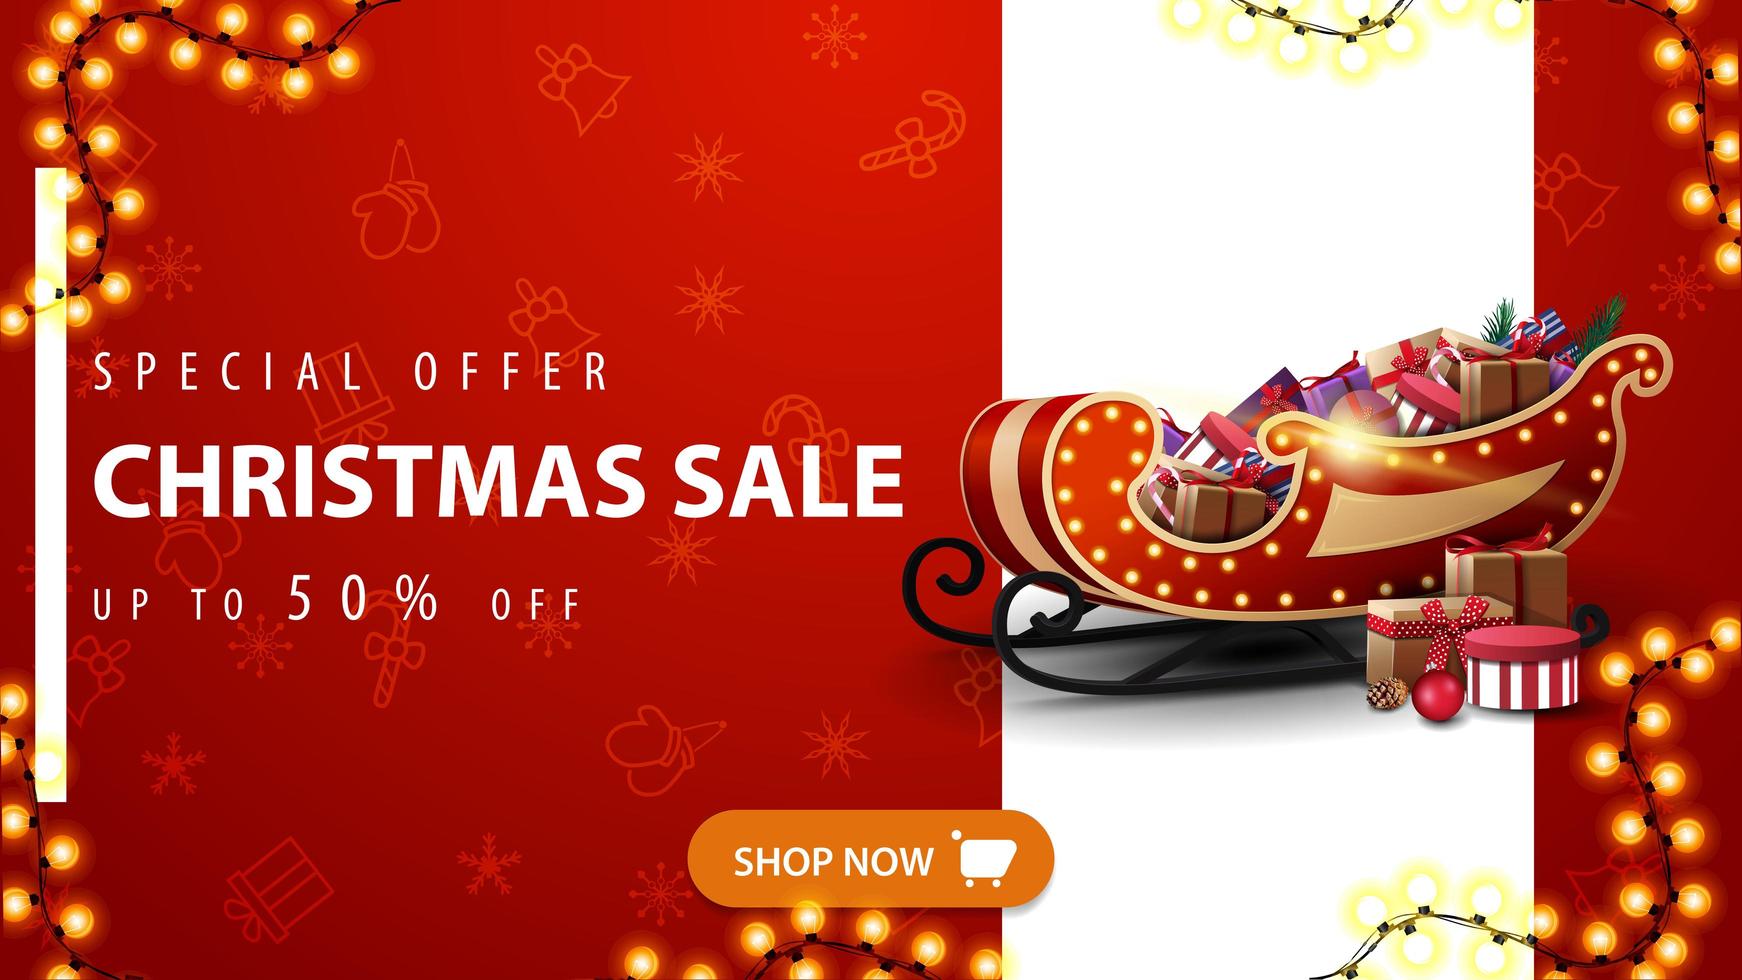 Special offer, Christmas sale, up to 50 off, red discount banner with vertical white line, orange button, Christmas pattern and Santa Sleigh with presents vector